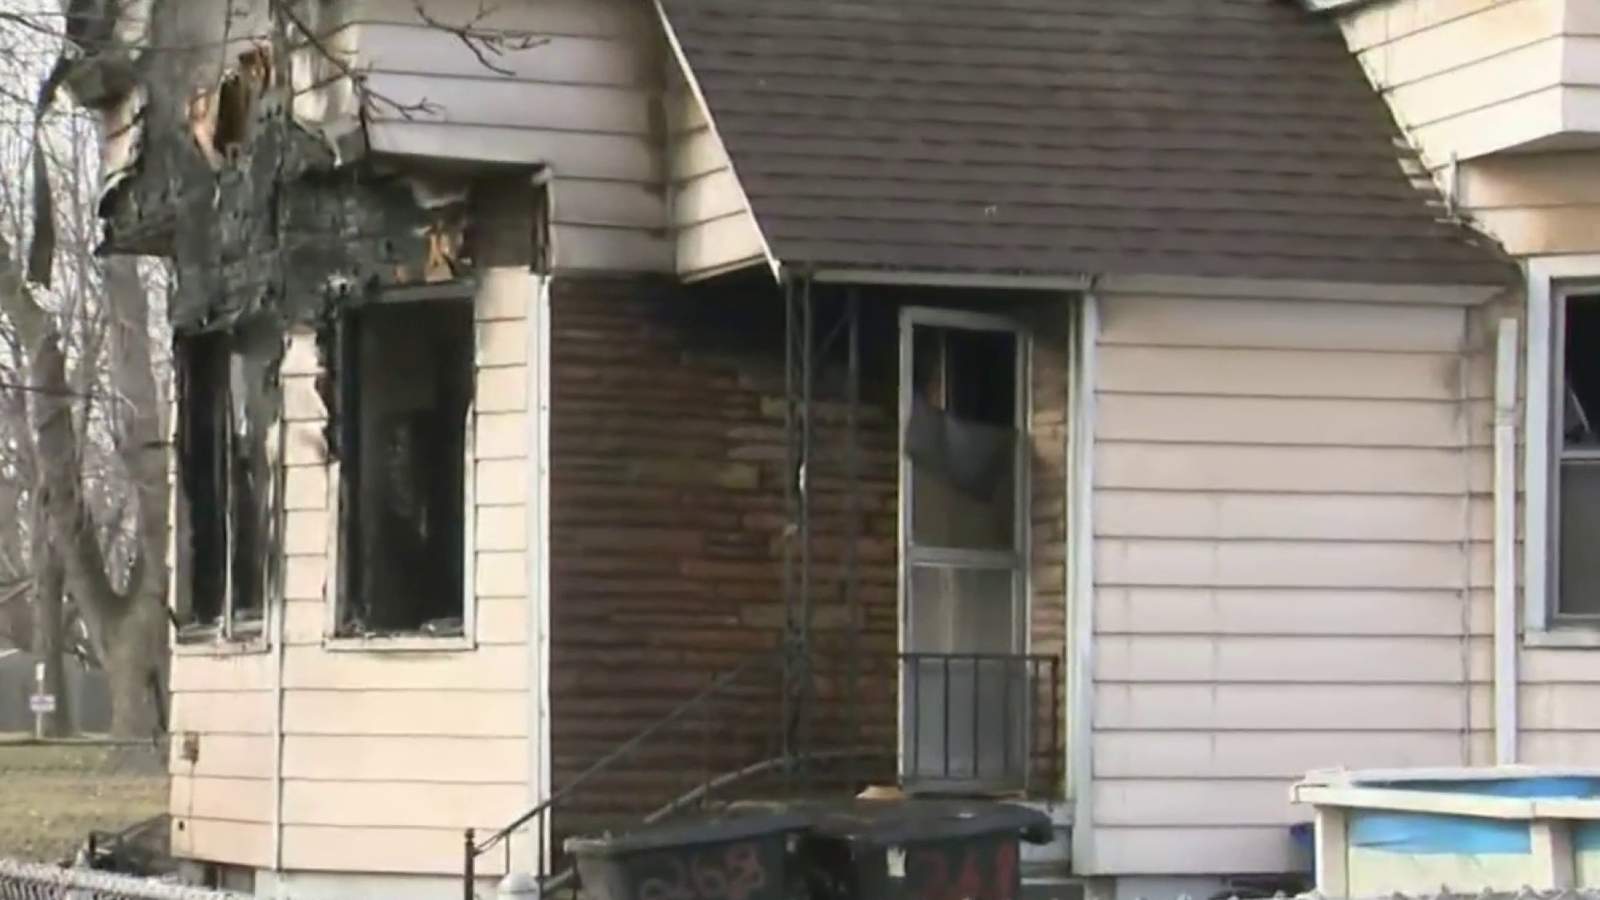 Firefighter hurt rescuing 21-year-old woman from burning home in southwest Detroit